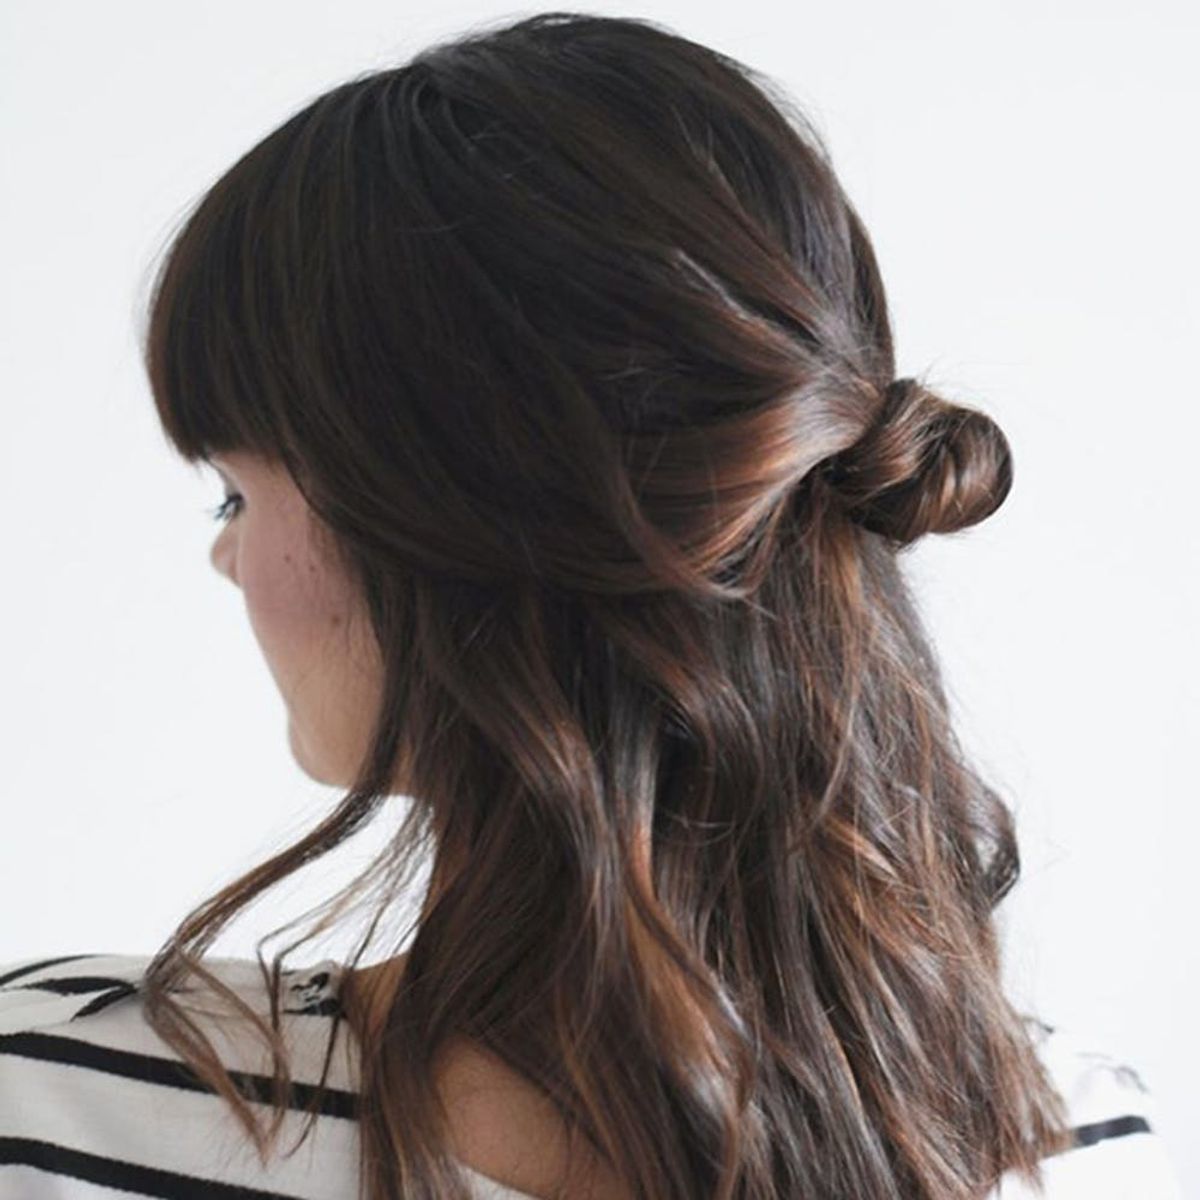 10 Ways to Wear Your Hair Down but Styled in 5 Minutes